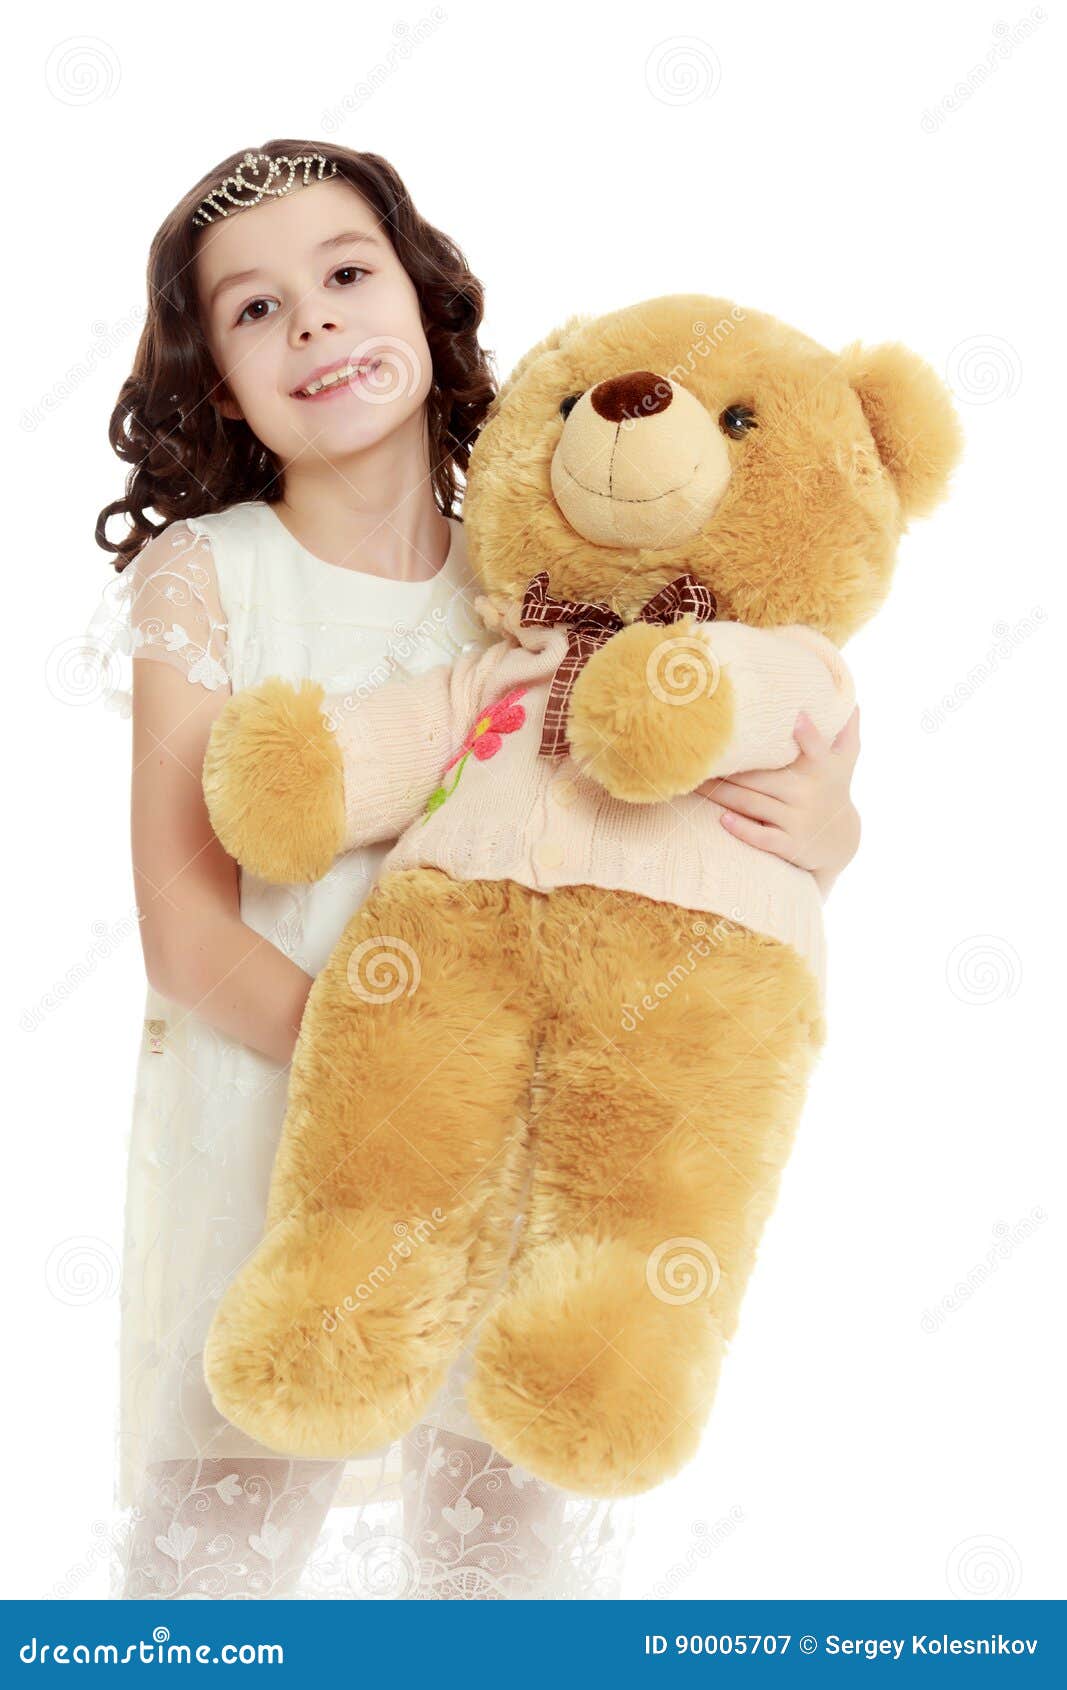 Girl with a Teddy bear. stock image. Image of home, celebrate - 90005707